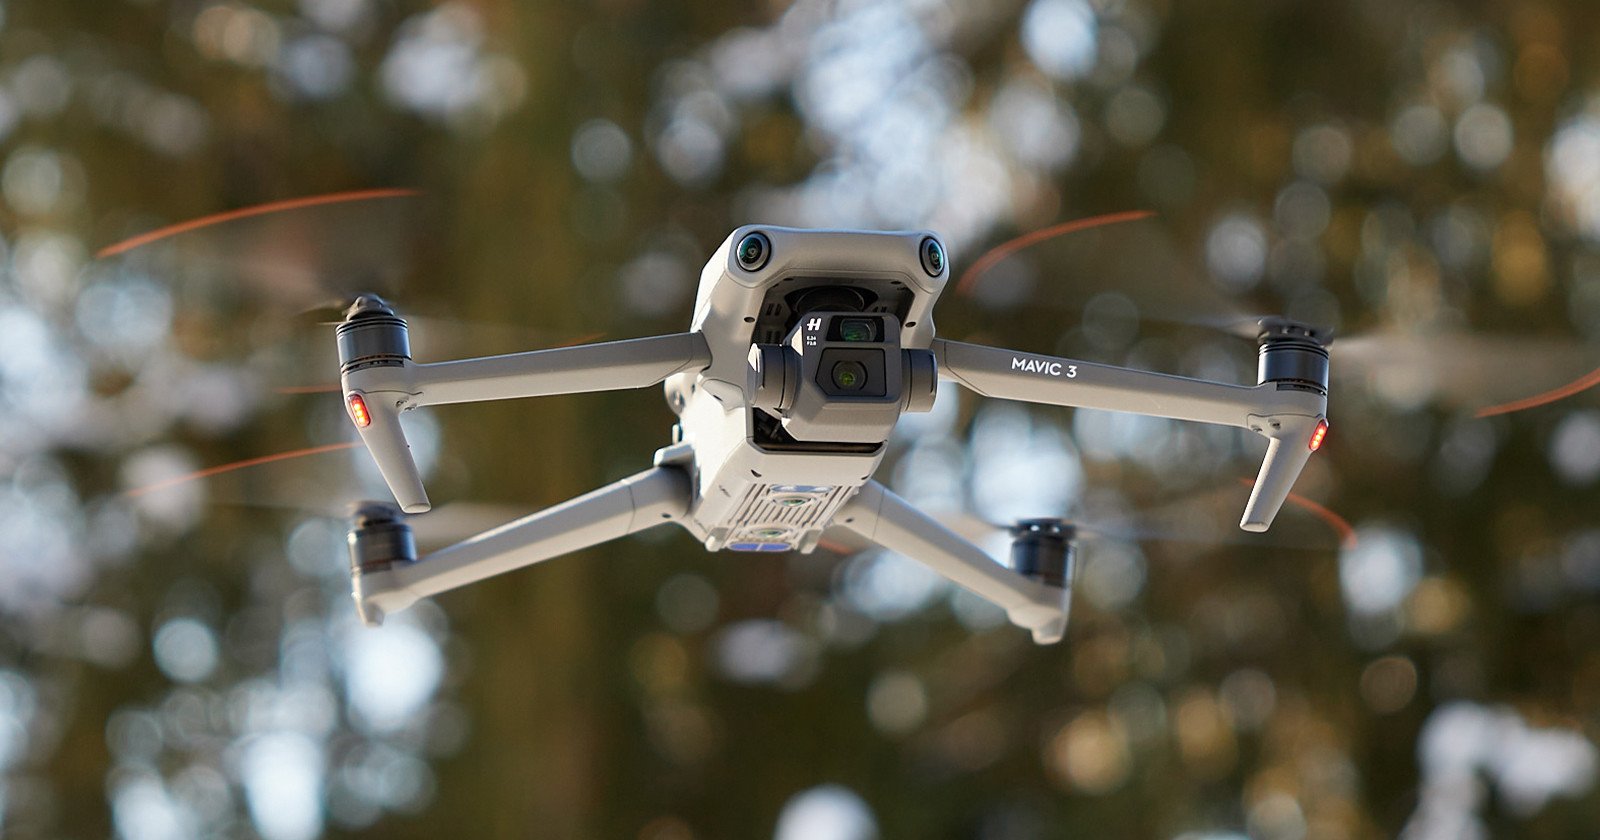 The Best Camera Drones in 2022